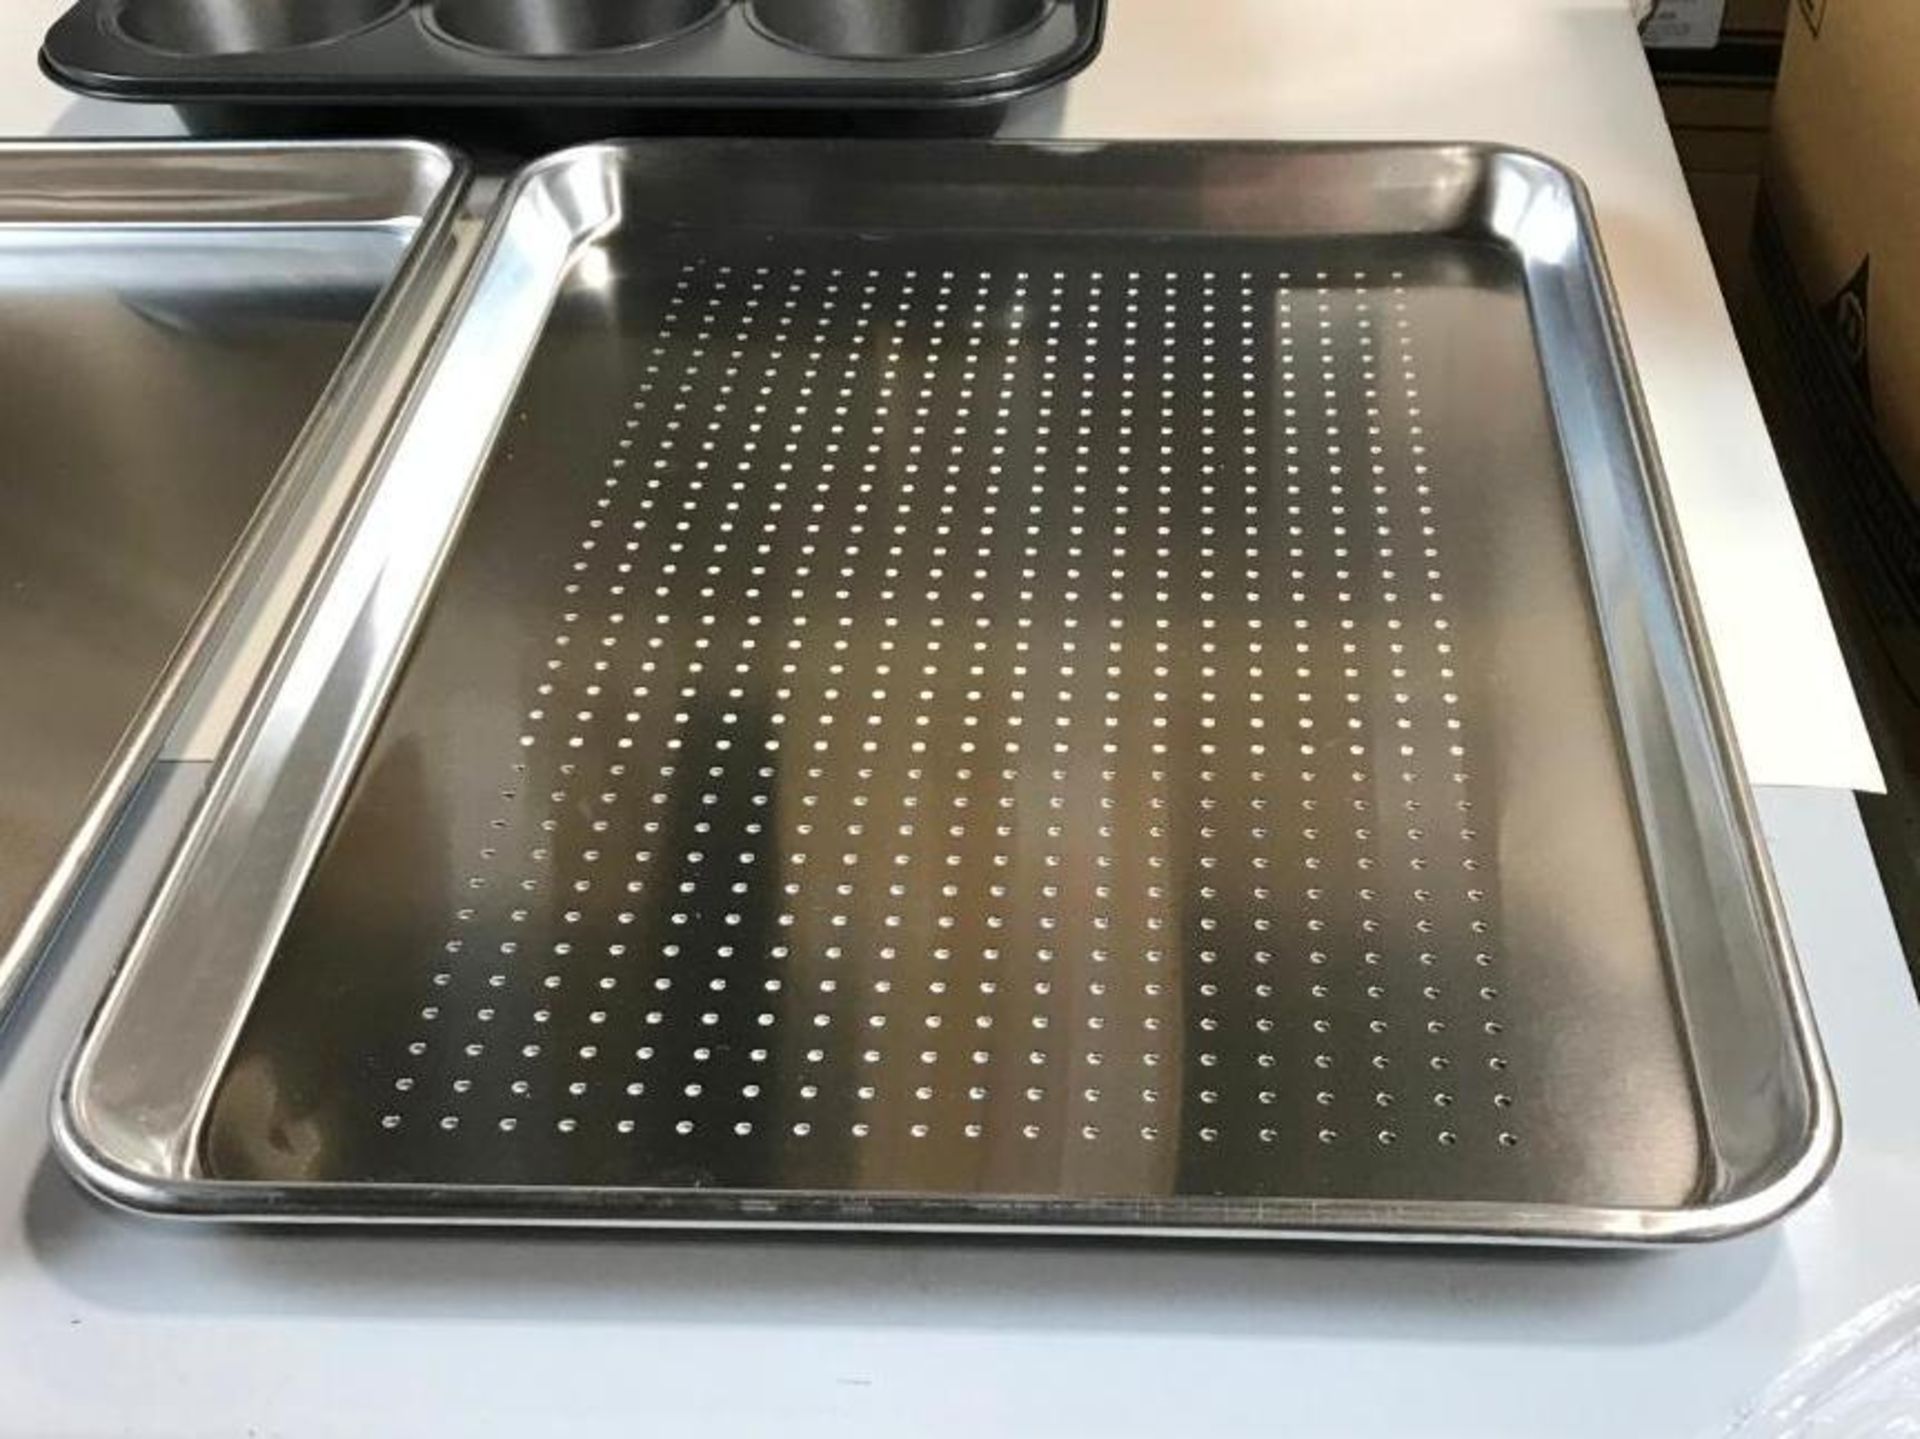 NEW BAKING PAN SET INCLUDING: - Image 4 of 6